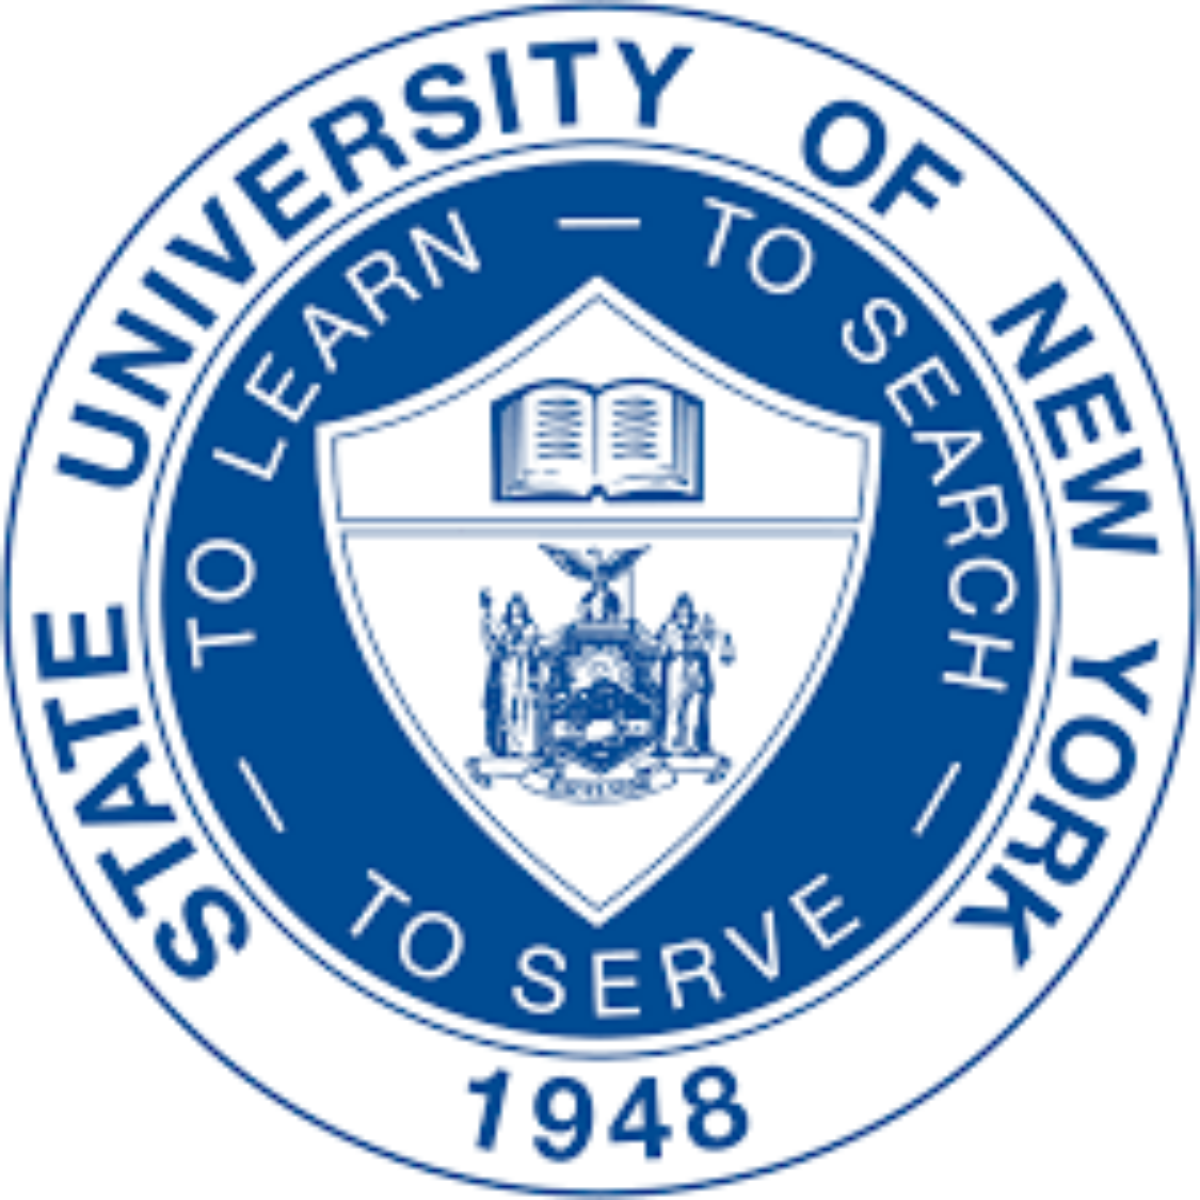 Julie Bargnesi Appointed to Council of the State University of New York at Buffalo.